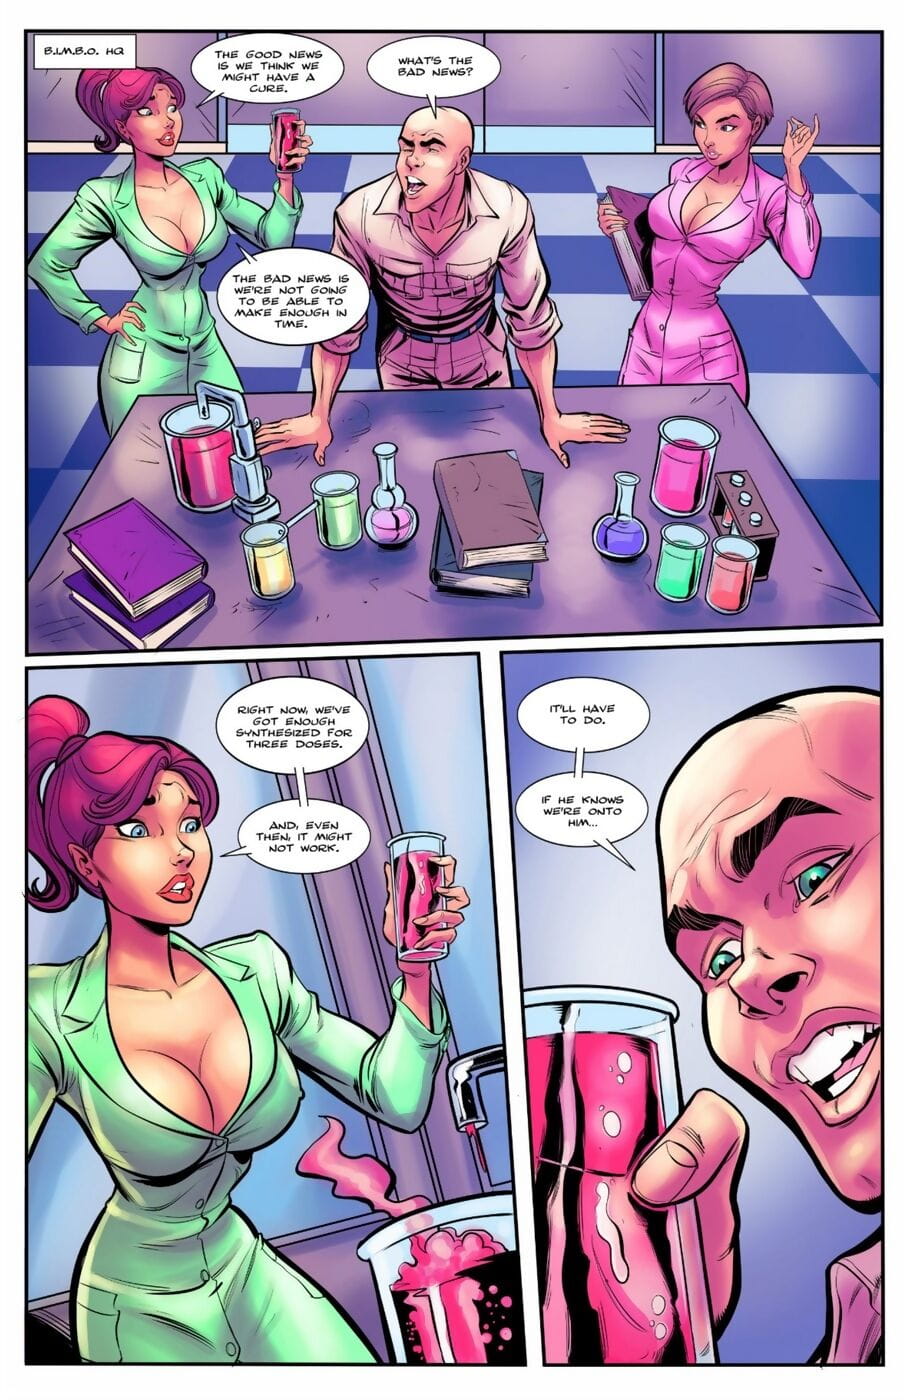 Bot- Sociopathic Tendencies Issue 4 page 1